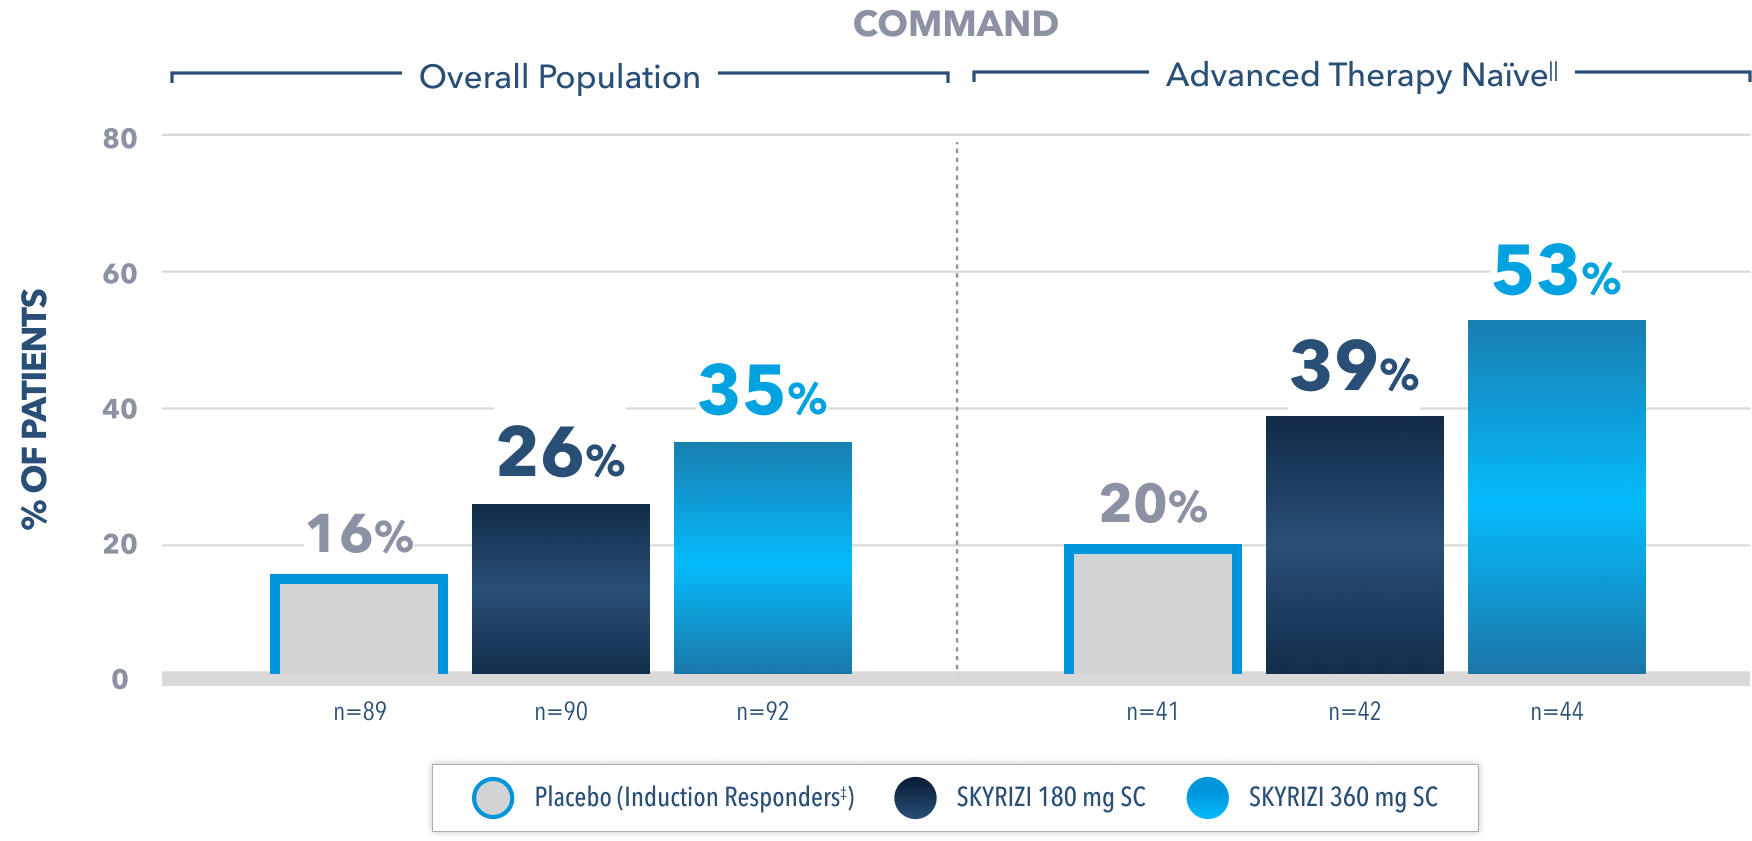 Bar chart of the COMMAND maintenance trial, comparing the percentage of patients achieving endoscopic remission at week 52 across different treatment groups in an overall population and advanced therapy naïve patients. 16% of placebo users in the overall population (n=89) and 20% in the subgroup (n=41) achieved endoscopic remission. 26% of patients who received 180mg SC of skyrizi in the overall population (n=90) and 39% in the subgroup (n=42) achieved endoscopic remission. 35% of patients who received 360mg SC of skyrizi in the overall population (n=92) and 53% in the subgroup (n=44) achieved endoscopic remission.